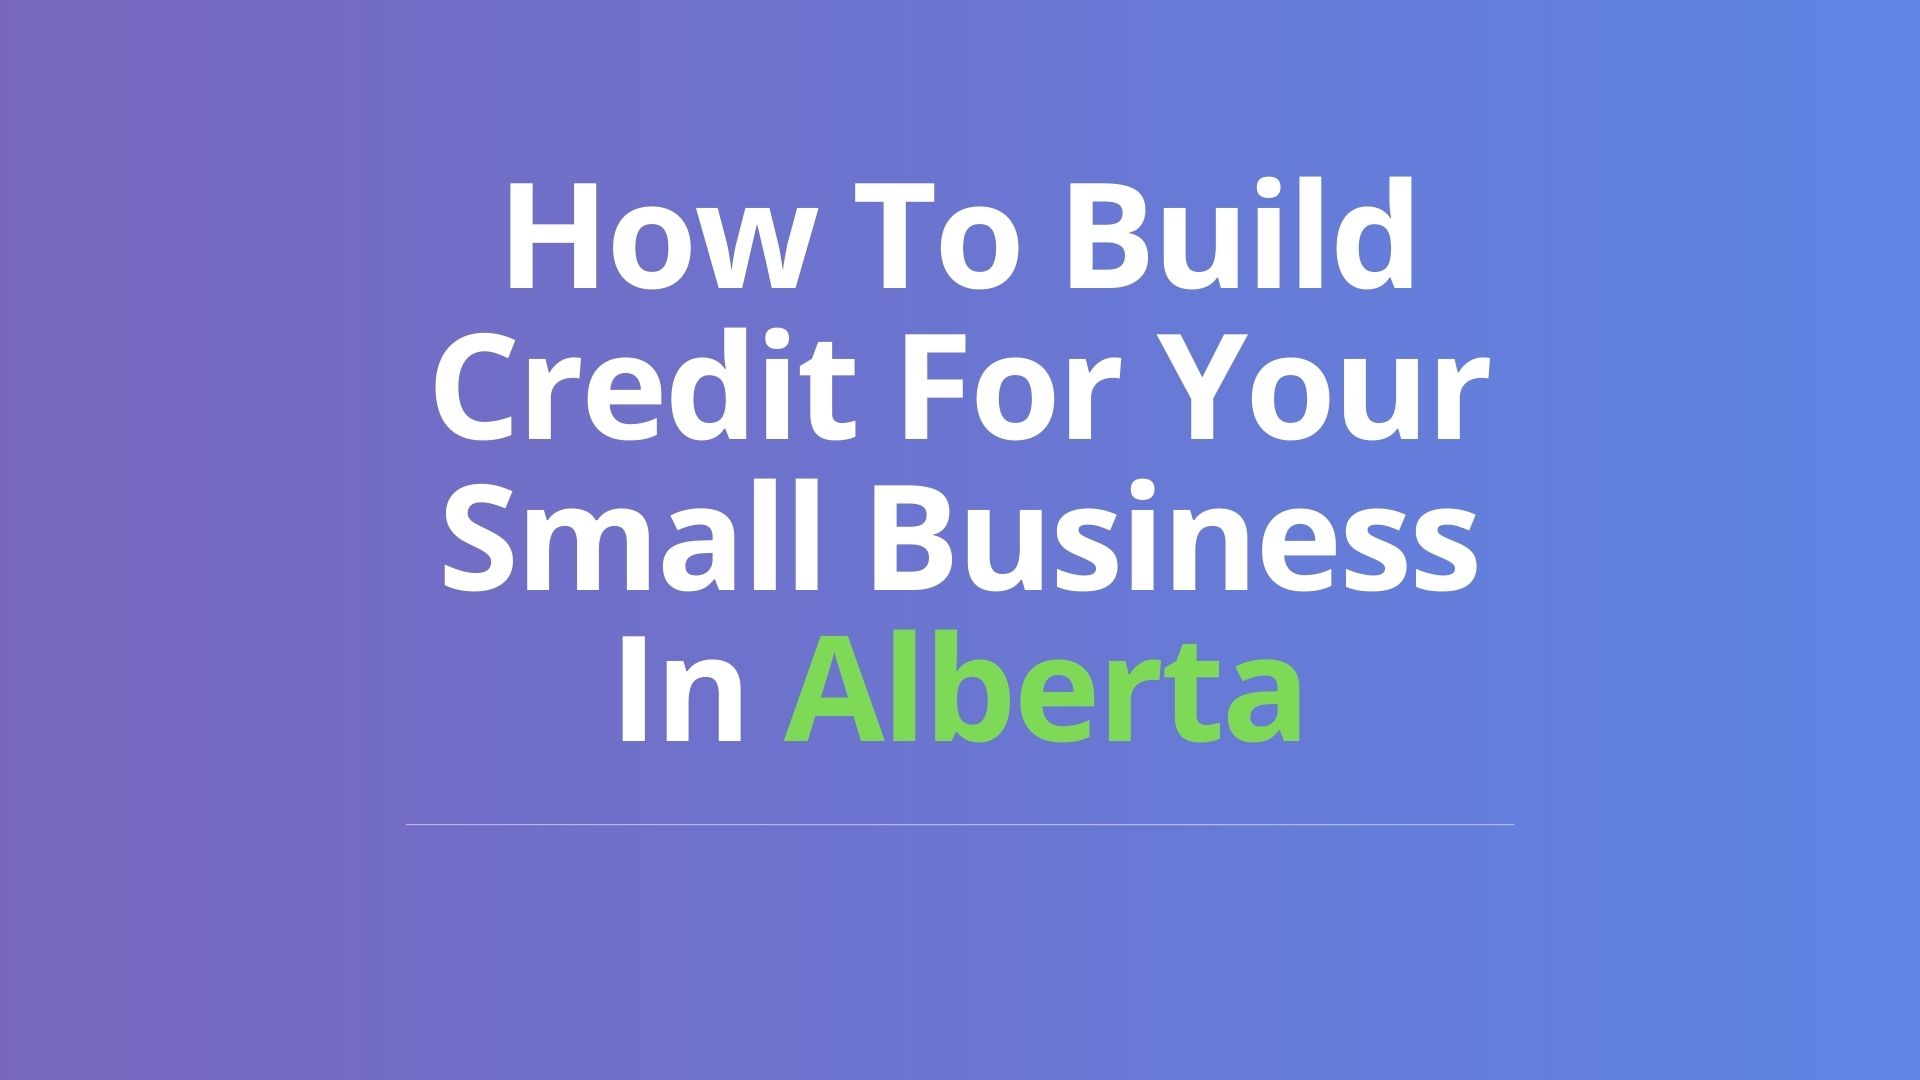 How To Build Credit For Your Small Business In Alberta